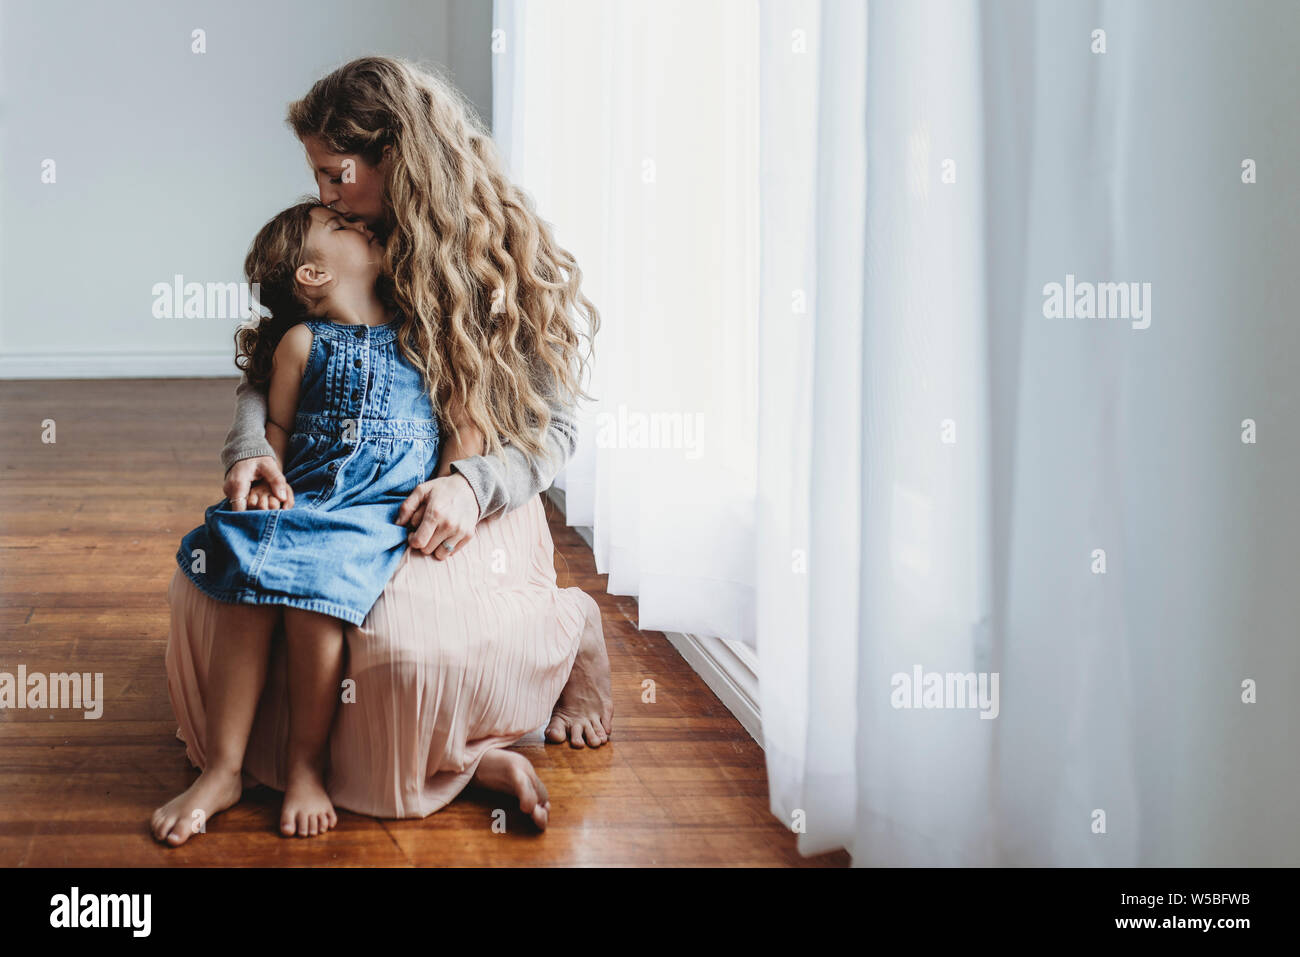 Full view of mother kissing daughter on forehead while holding hands Stock Photo